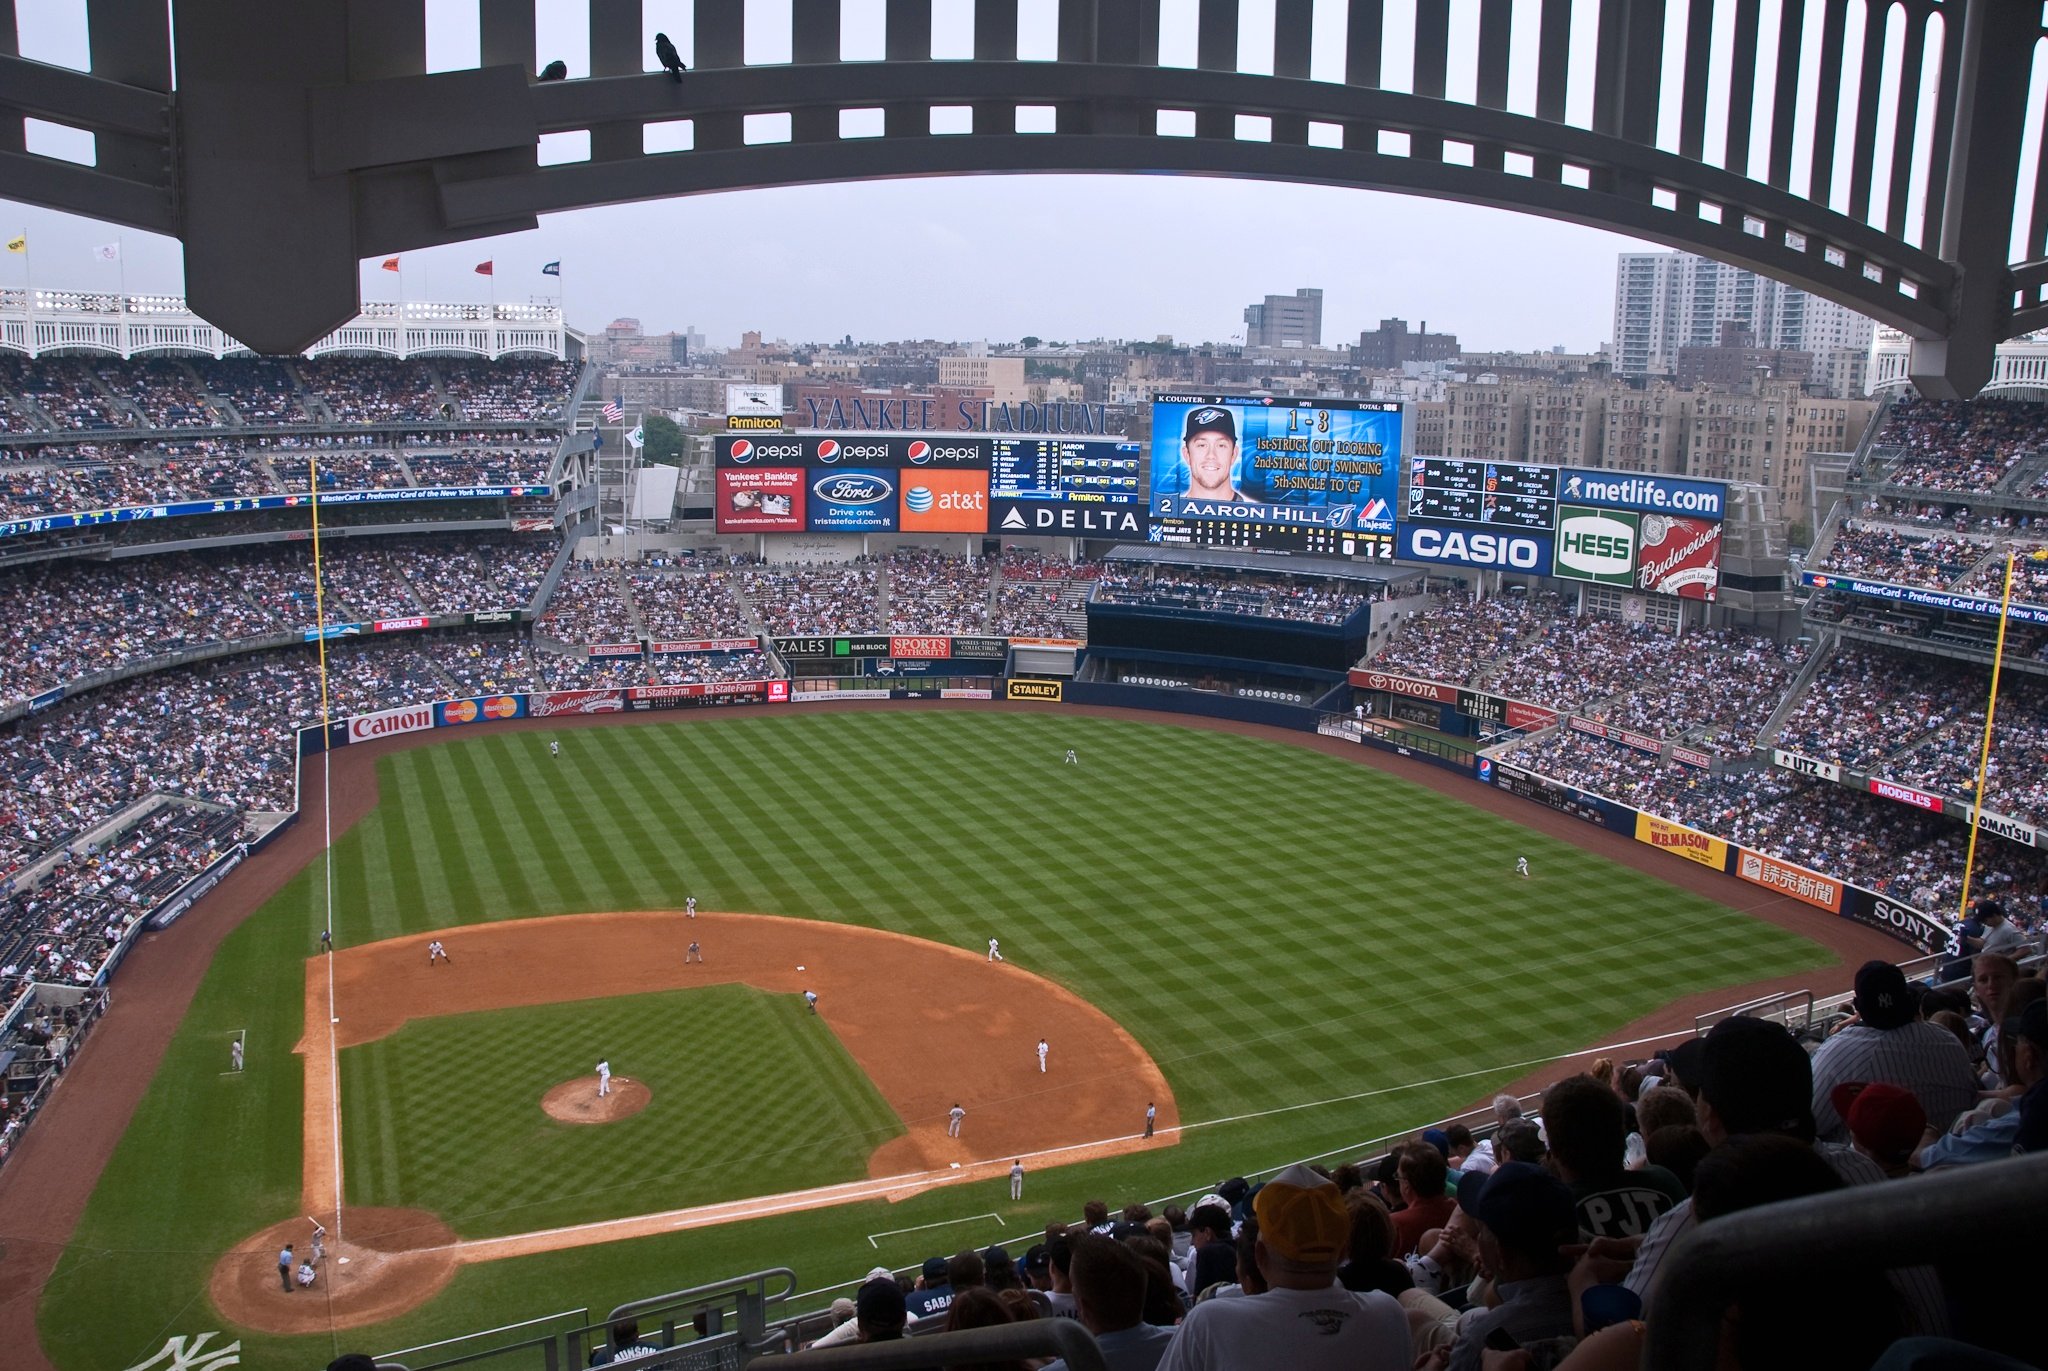 FileThe view from the Grandstand Level at New Yankee Stadium.jpg